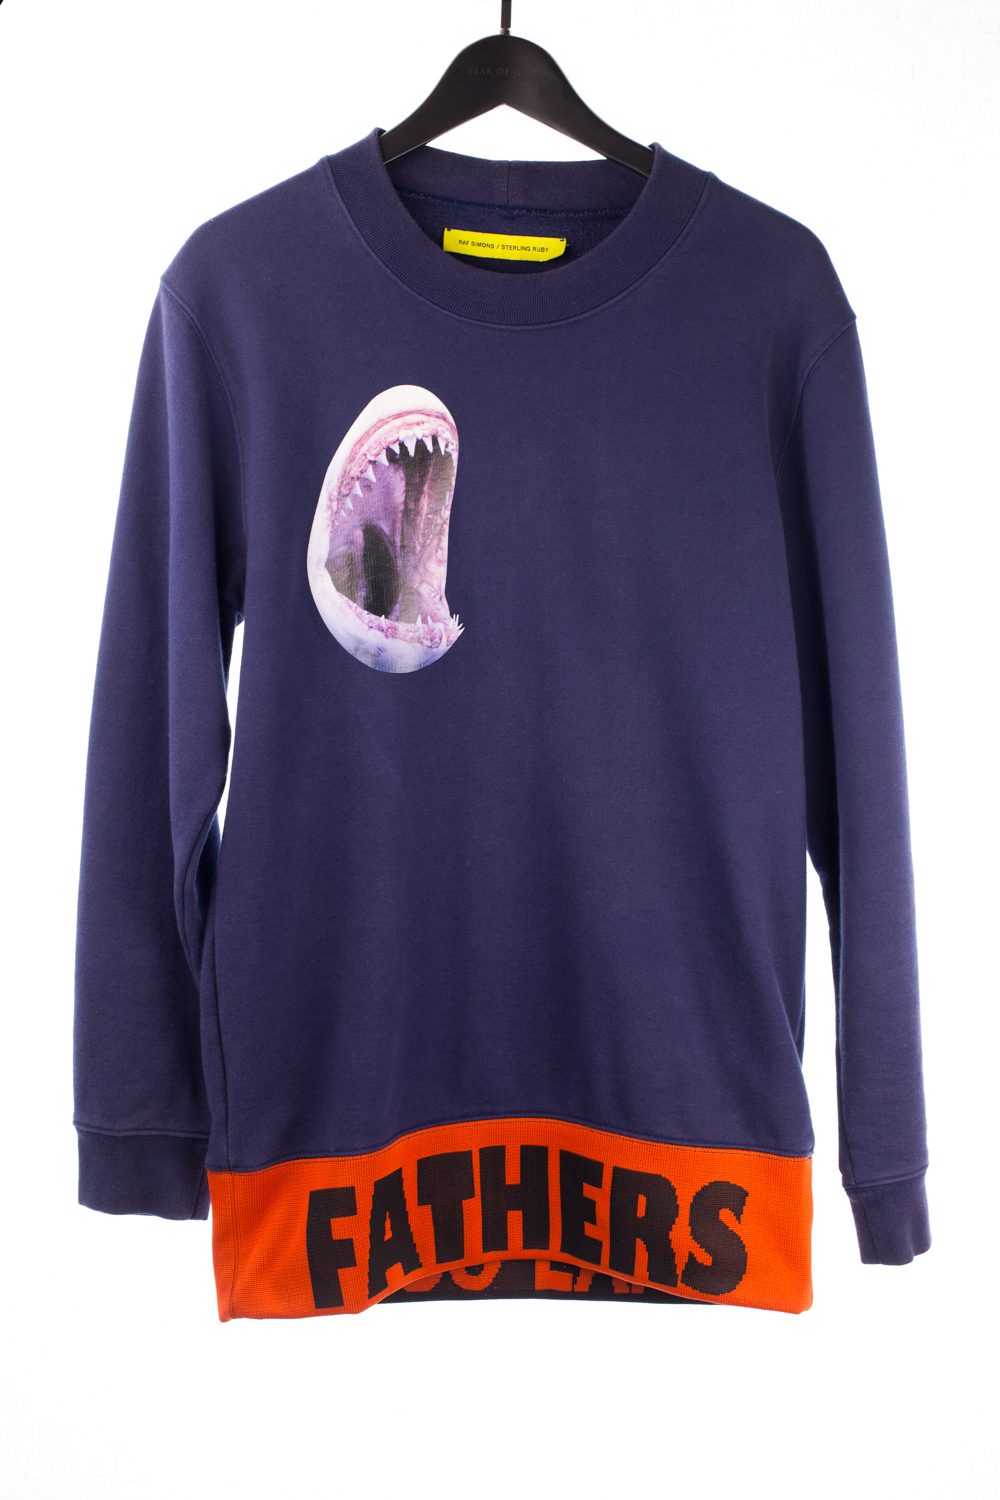 RS X Sterling Ruby “FATHERS” “ABUS LANG” Sweatshirt